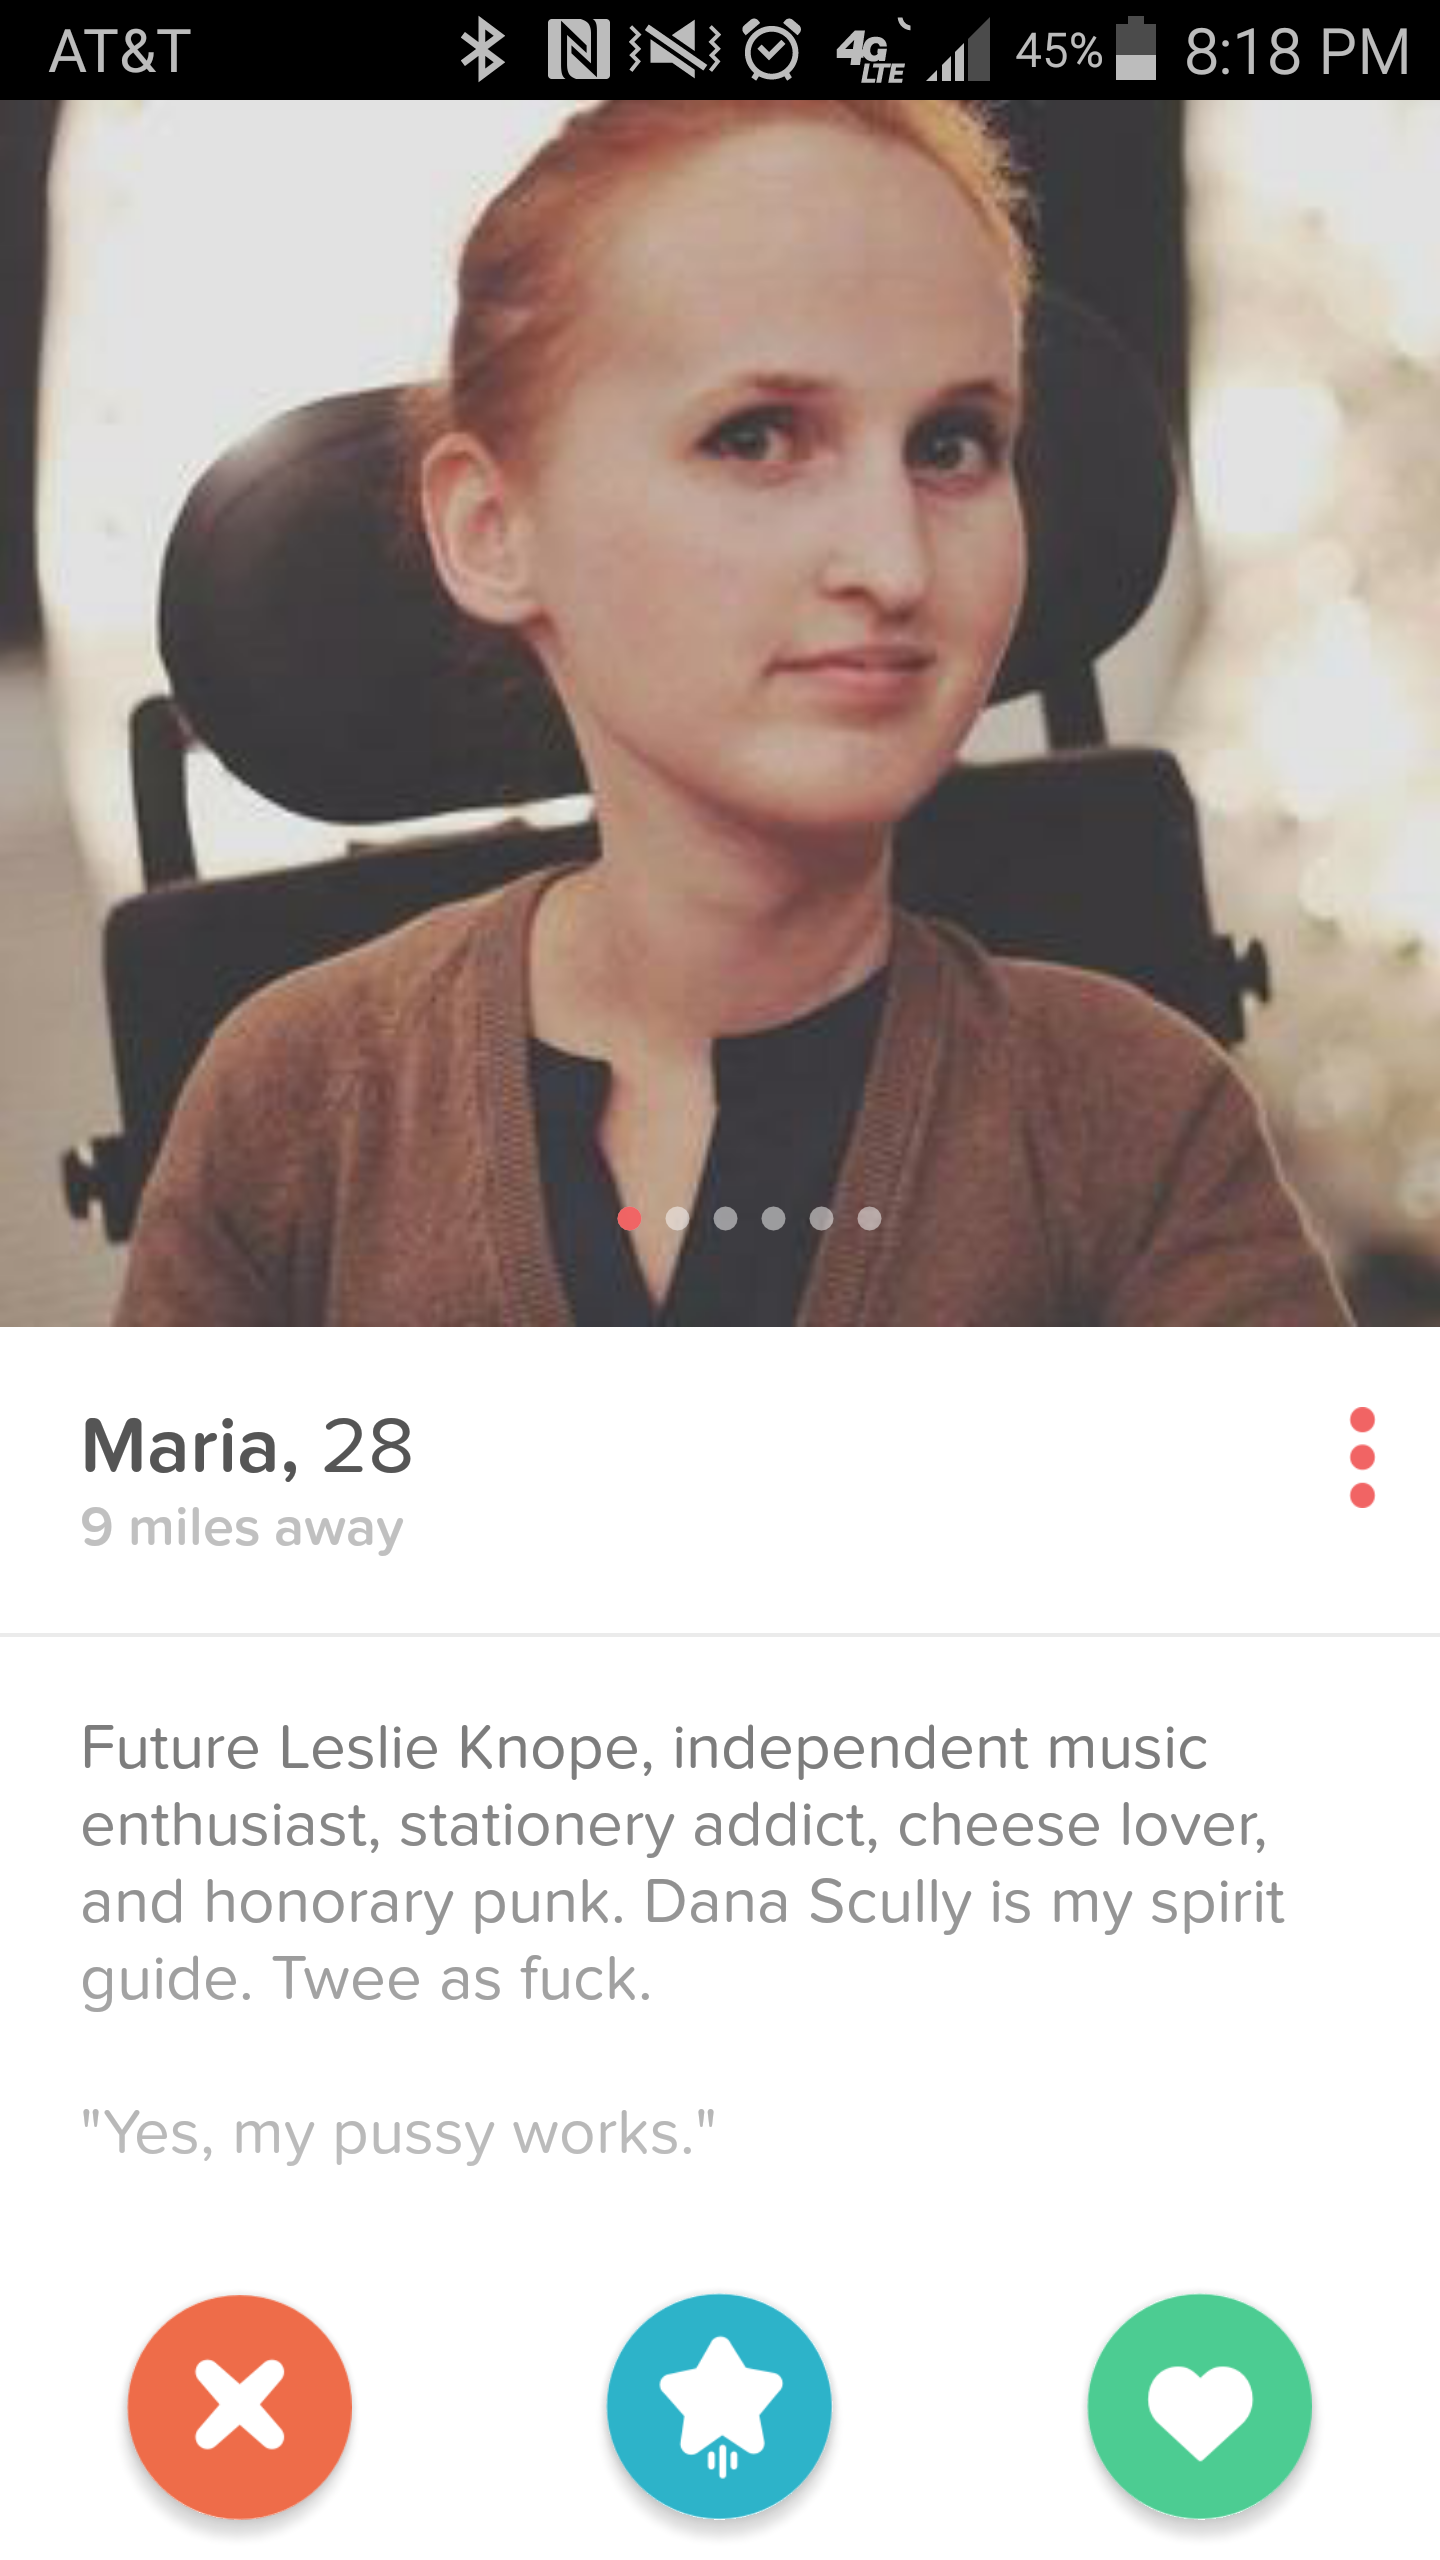 tinder meme goat - At&T Nno 45% Maria, 28 9 miles away Future Leslie Knope, independent music enthusiast, stationery addict, cheese lover, and honorary punk Dana Scully is my spirit guide. Twee as fuck 'Yes, my pussy works."